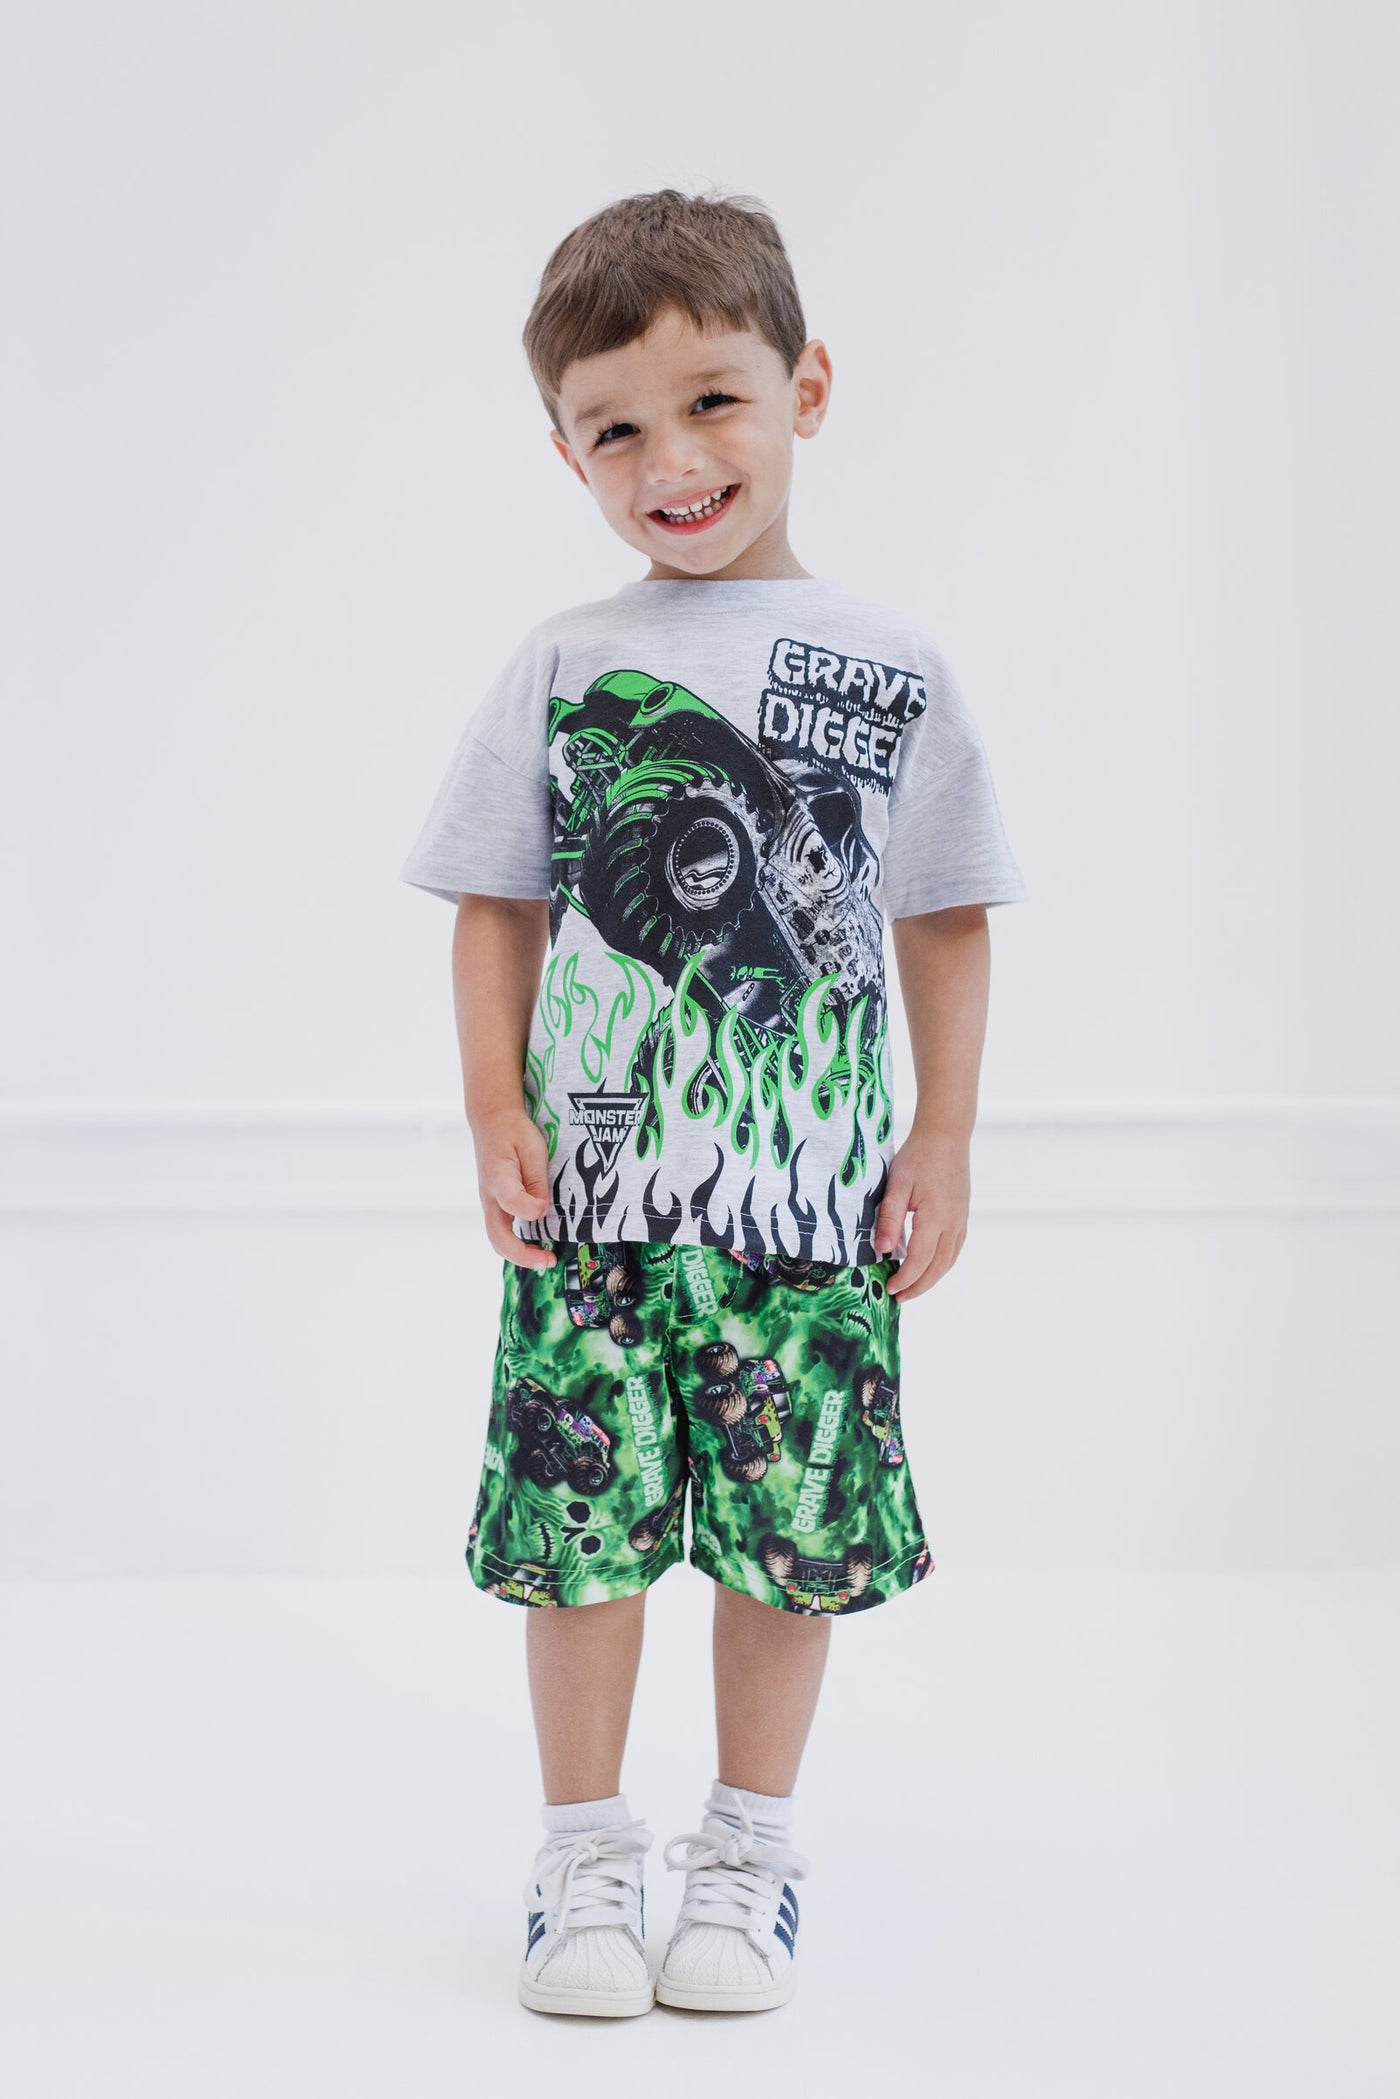 Monster Jam Grave Digger T-Shirt and Shorts Outfit Set